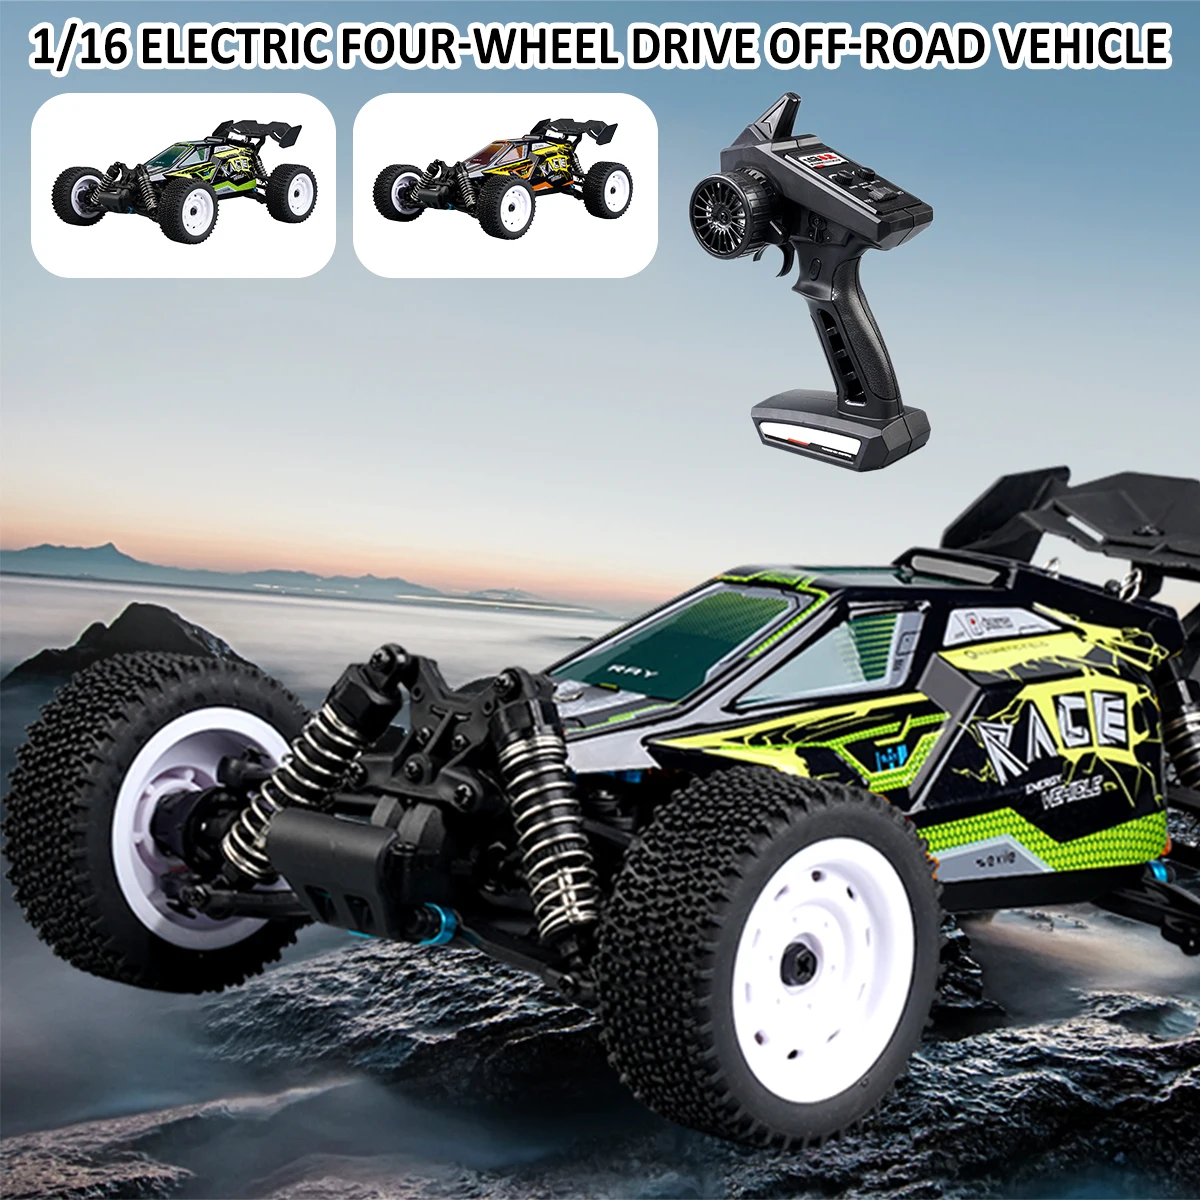 2.4G RC Car 1:16 Remote Control Drift Racing Car 4WD 35km/h High Speed Off Road Vehicles Electronic Race Toy Gift for Kids Adult enlarge